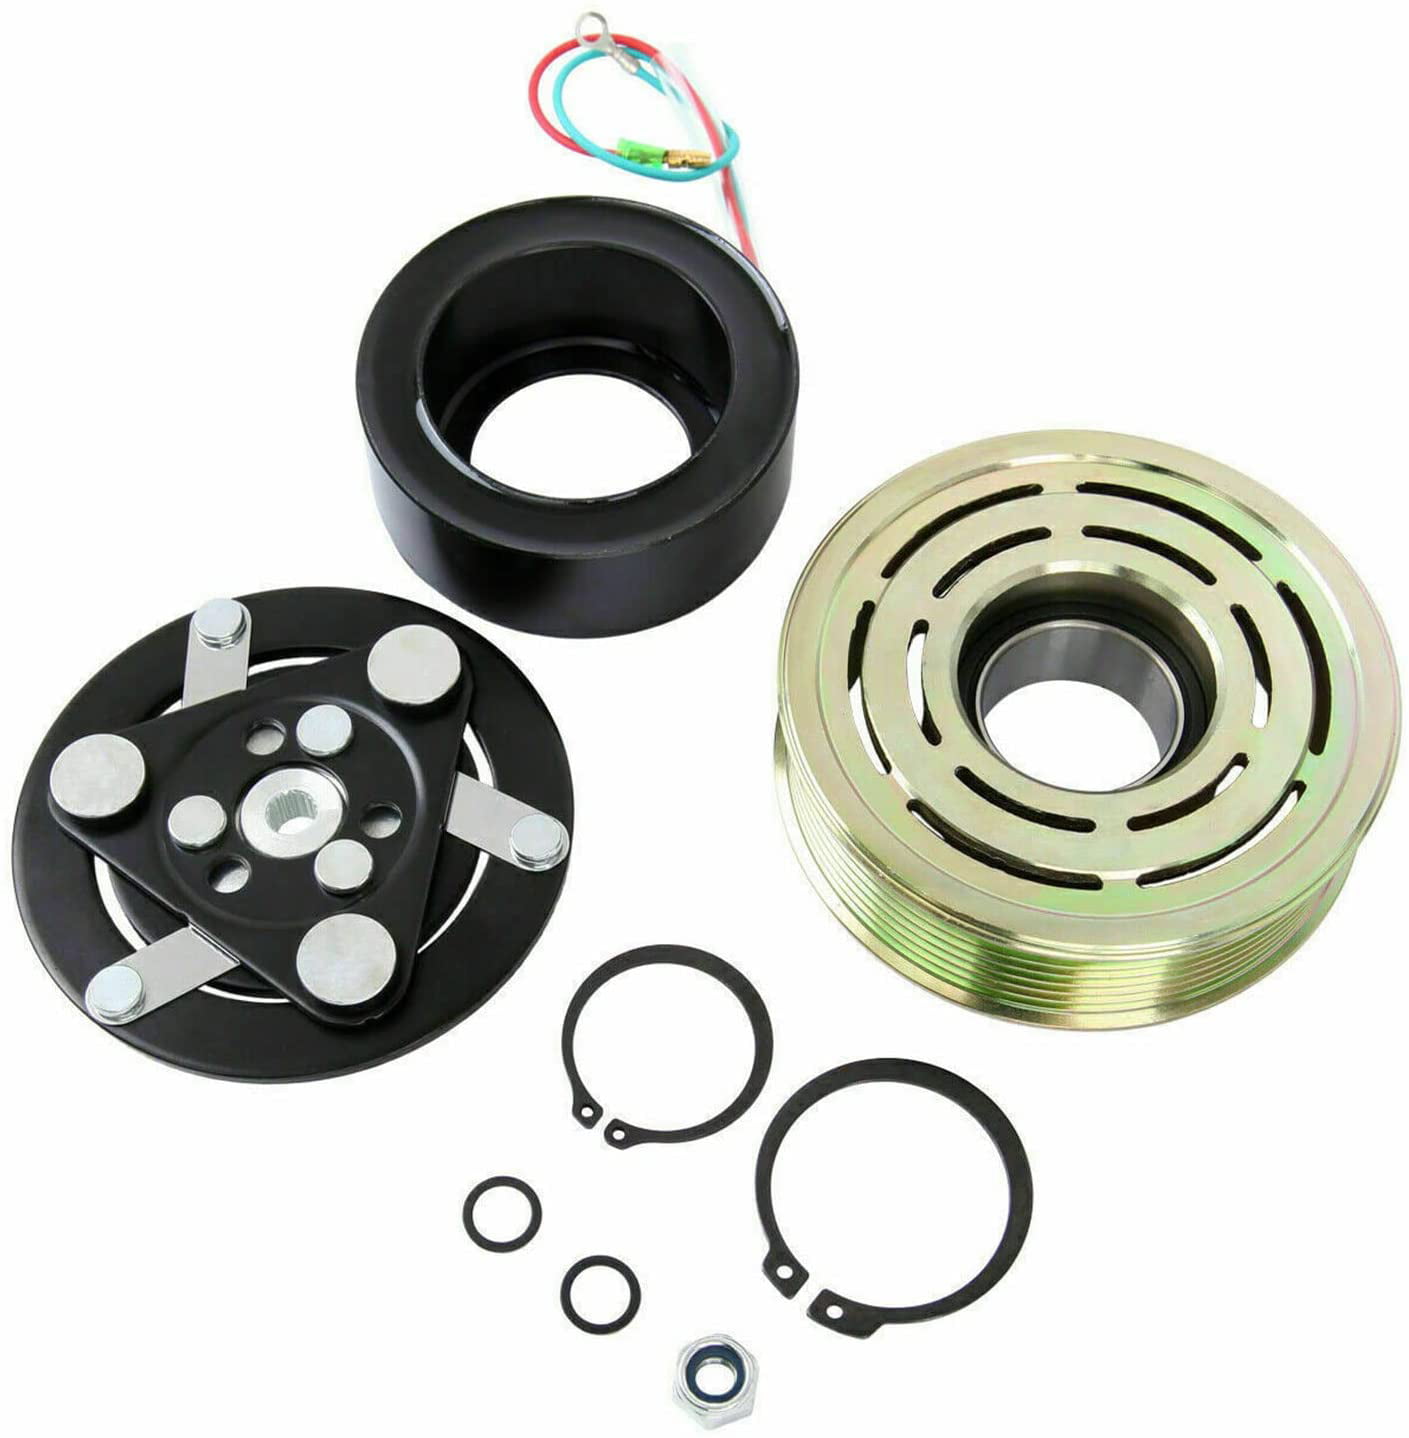 JADODE A/C Compressor Clutch Kit Pulley Coil Replacement for Honda CR-V ...